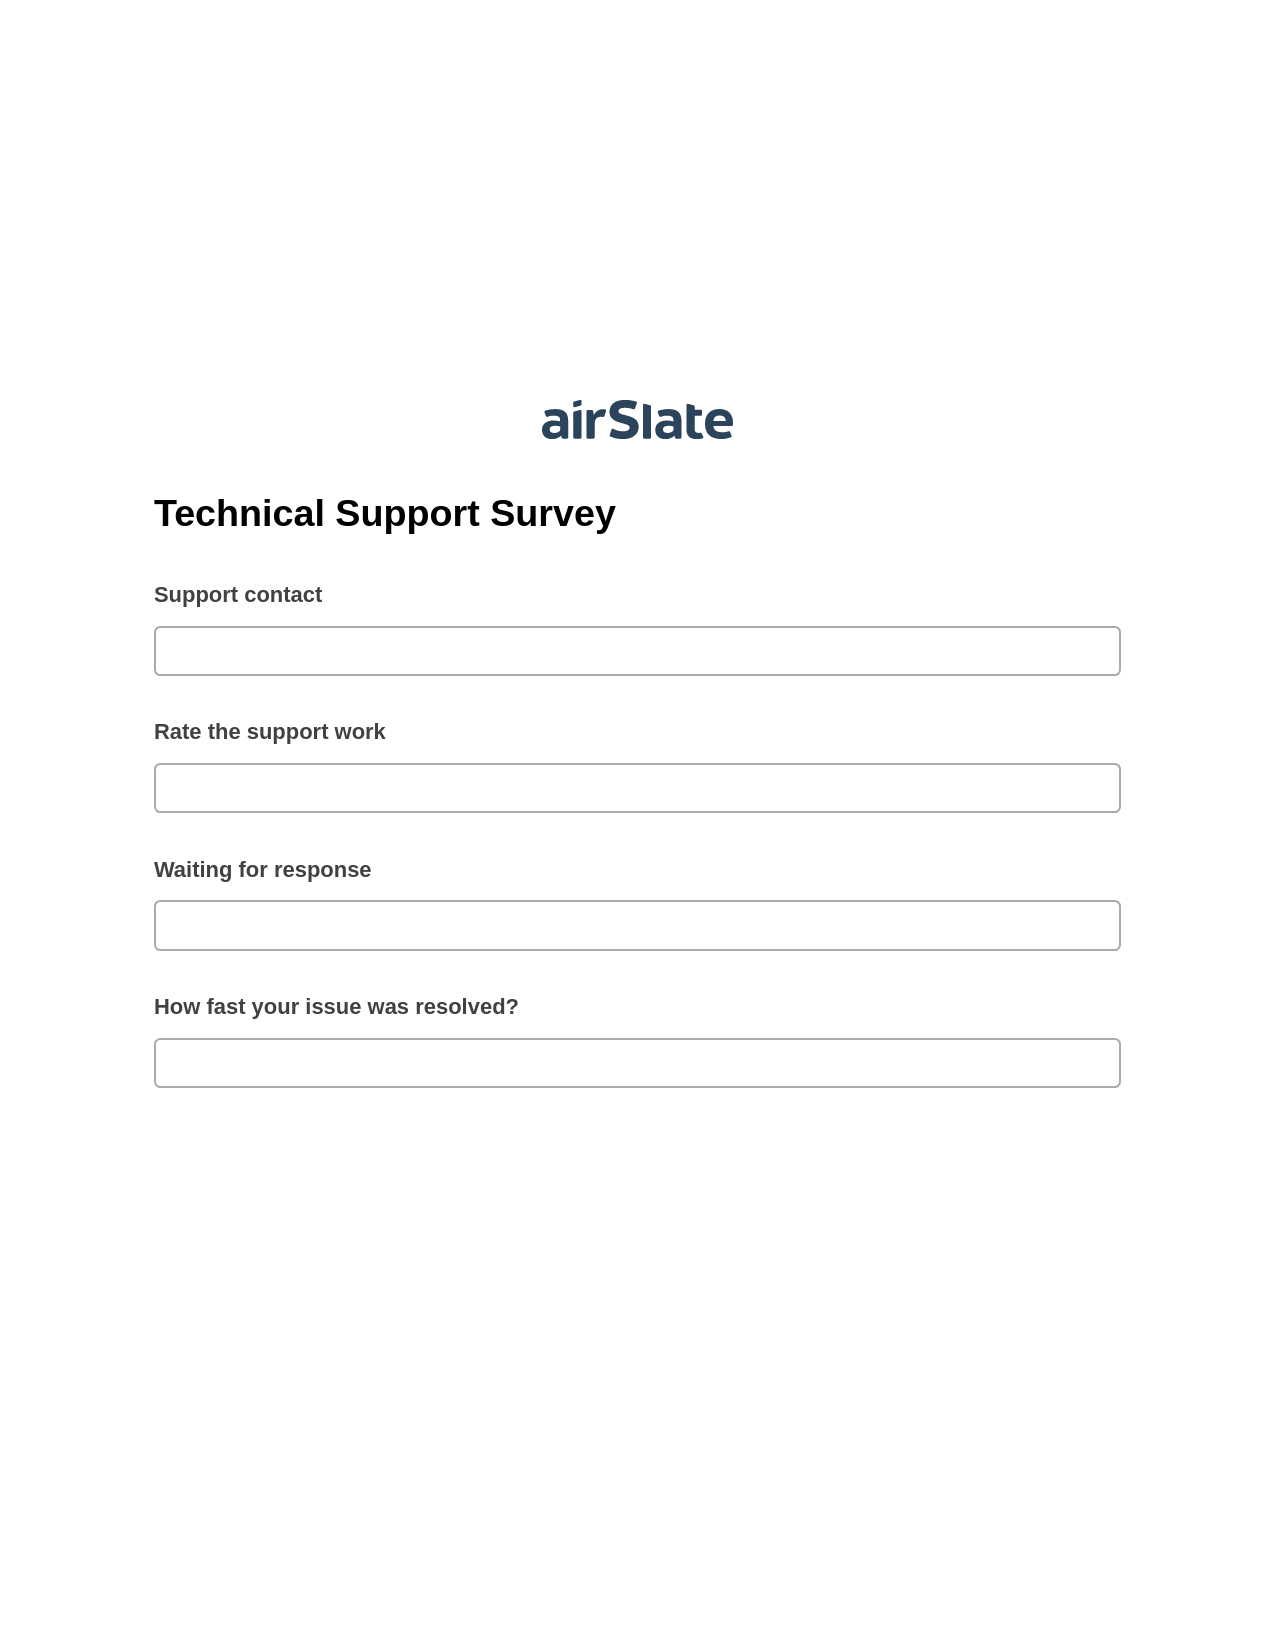 Technical Support Survey Pre-fill from Salesforce Records Bot, Slack Notification Bot, Export to Salesforce Record Bot